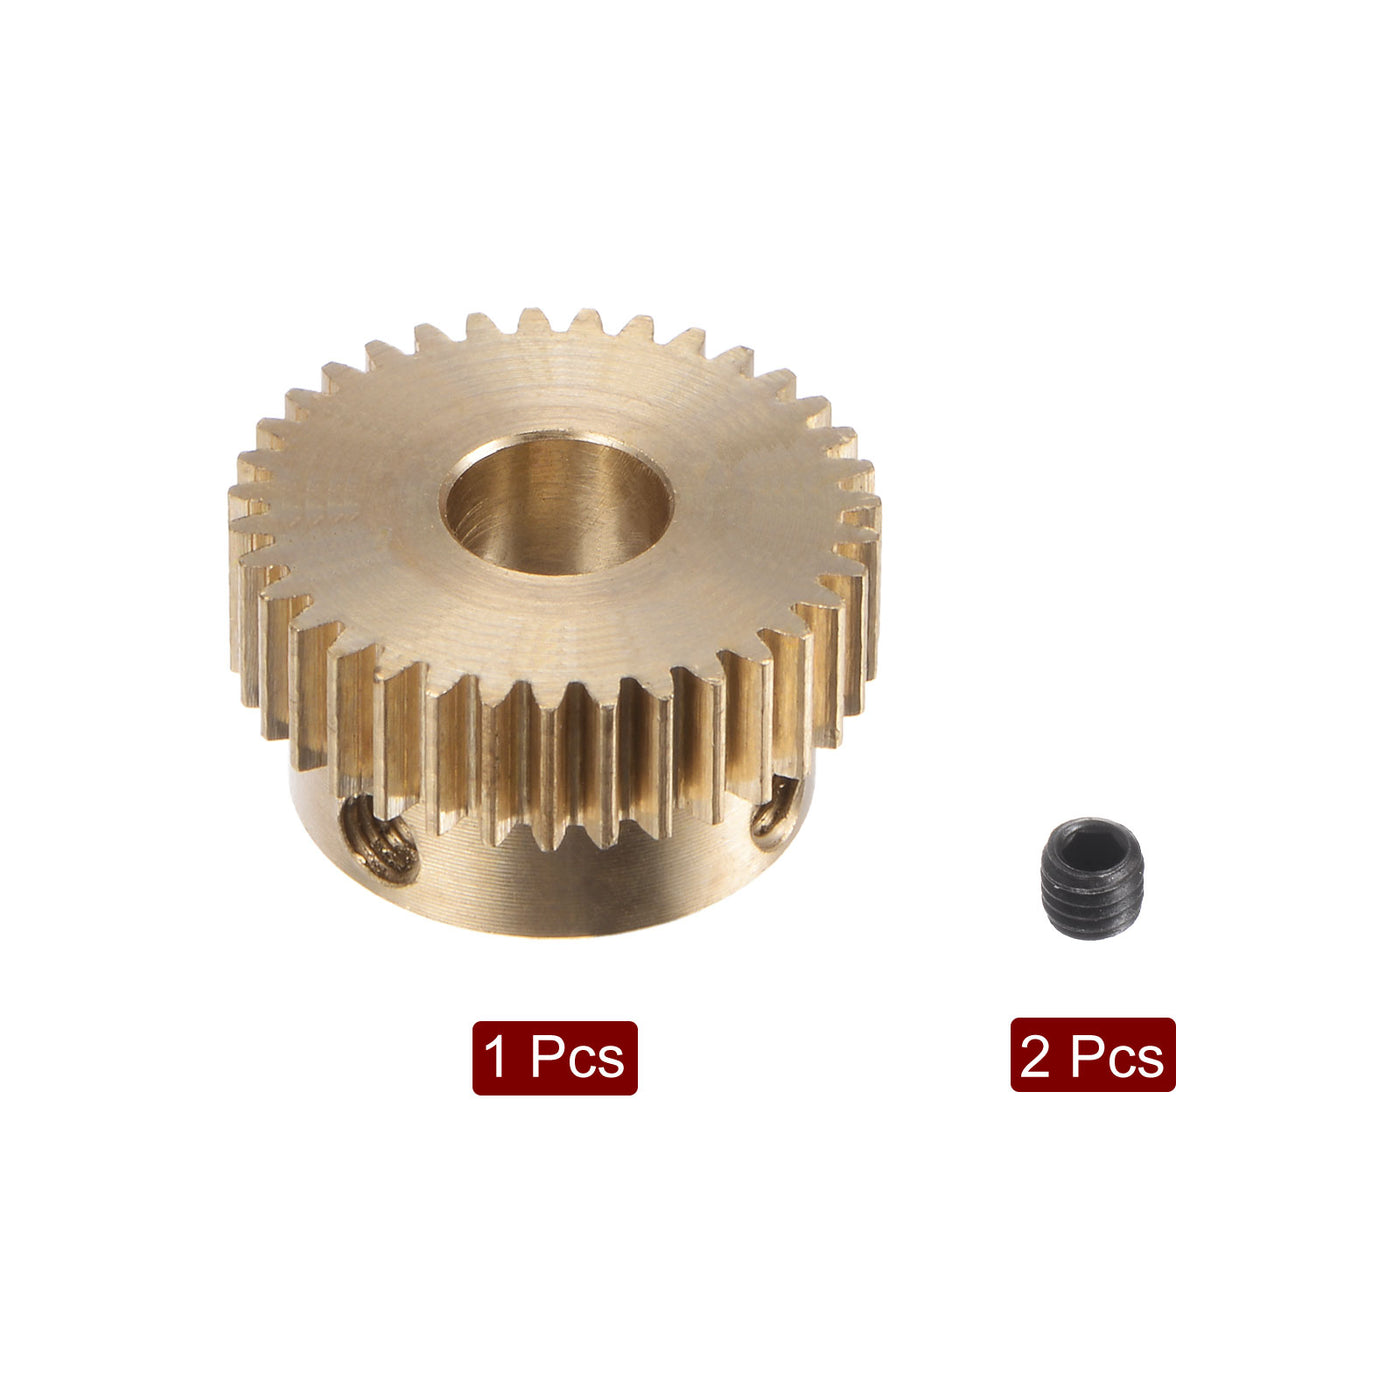 uxcell Uxcell 0.5 Mod 35T 6mm Bore 18mm Outer Dia Brass Motor Rack Pinion Gear with Screws